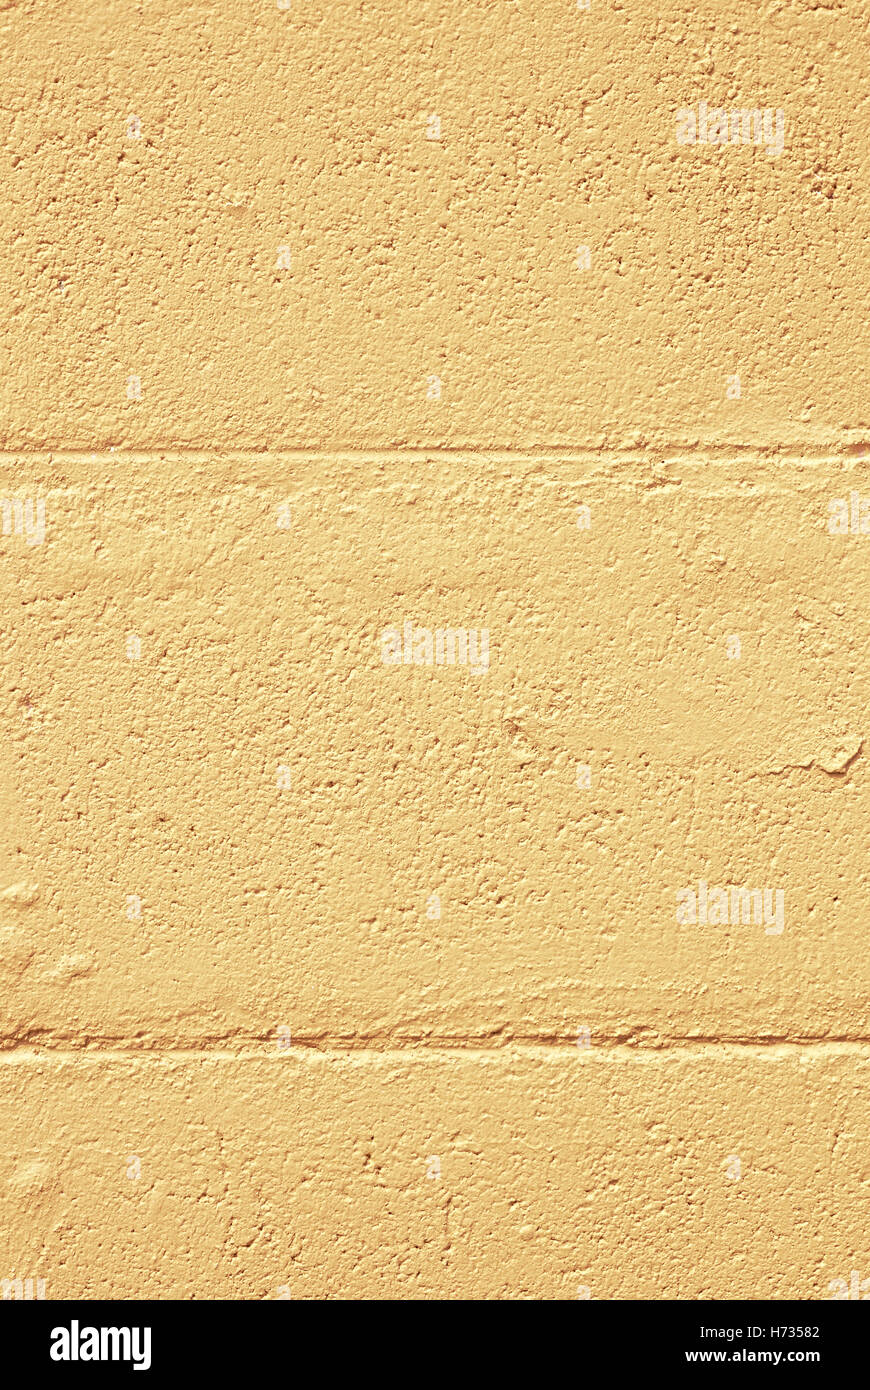 textured grunge wall as background Stock Photo